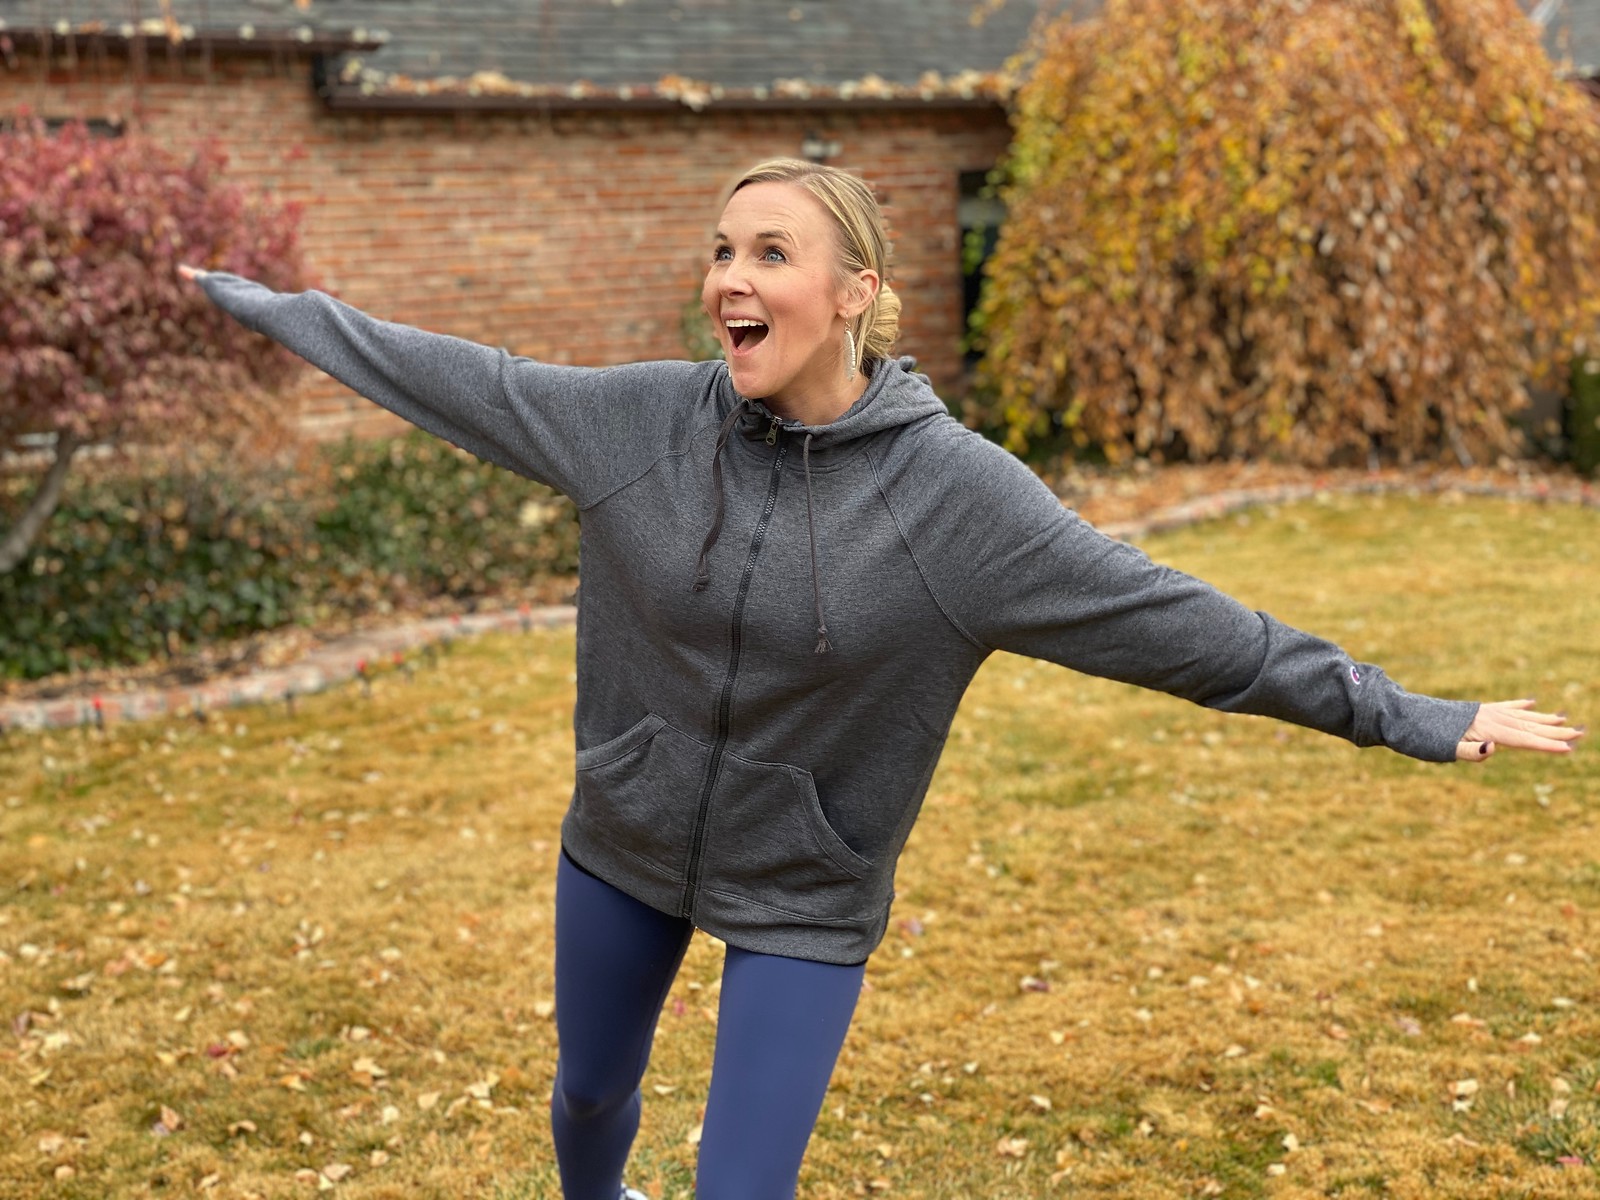 woman dancing in yard excited for our hip2keto community to learn how to start the keto diet